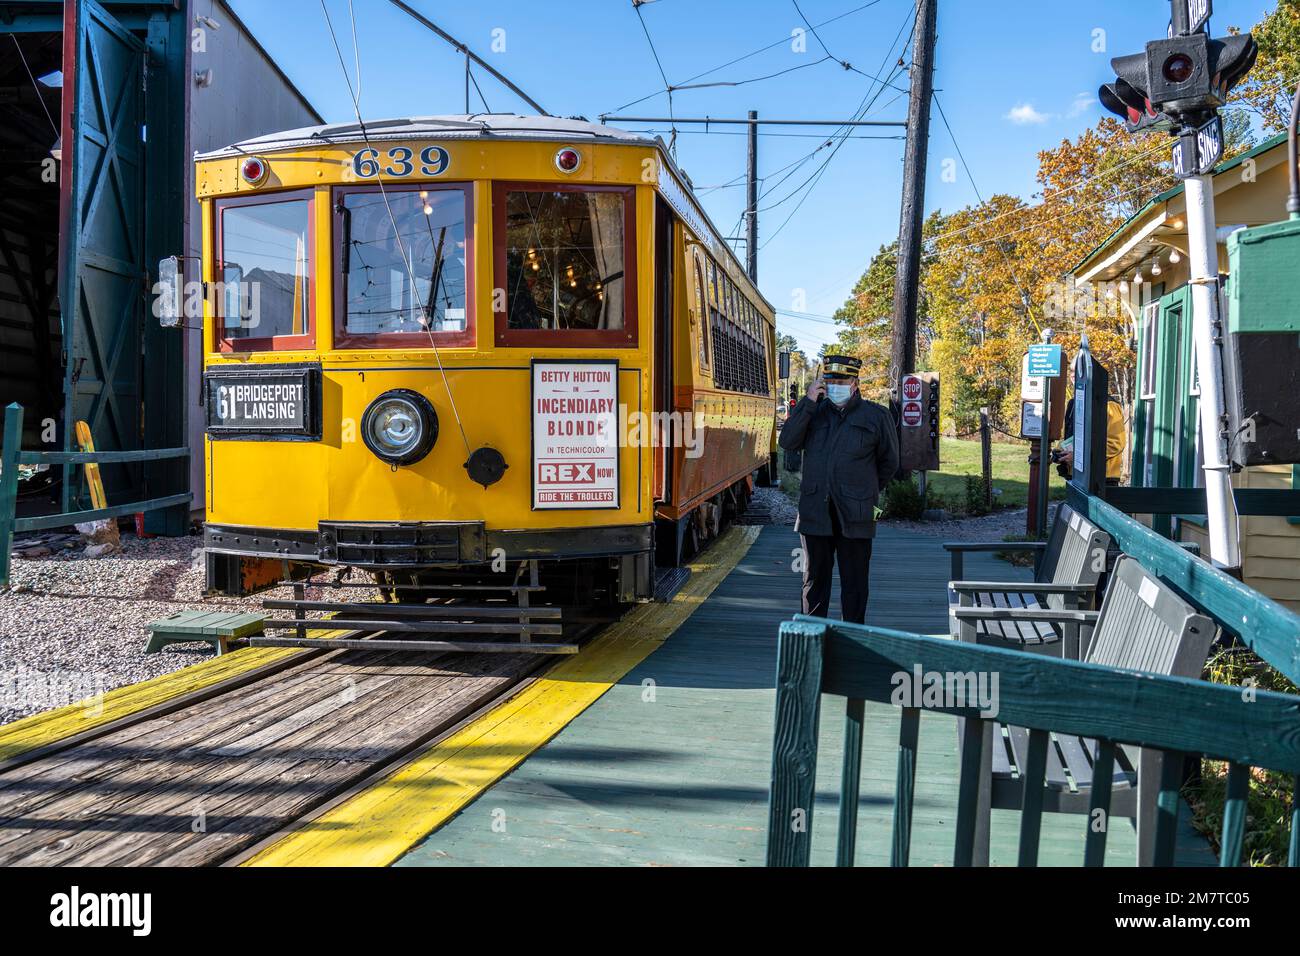 Morrison Hill Station stop at the Seashore Trolley Museum where visitors can get off to walk around the campus and visit the Riverside Car Barn Stock Photo